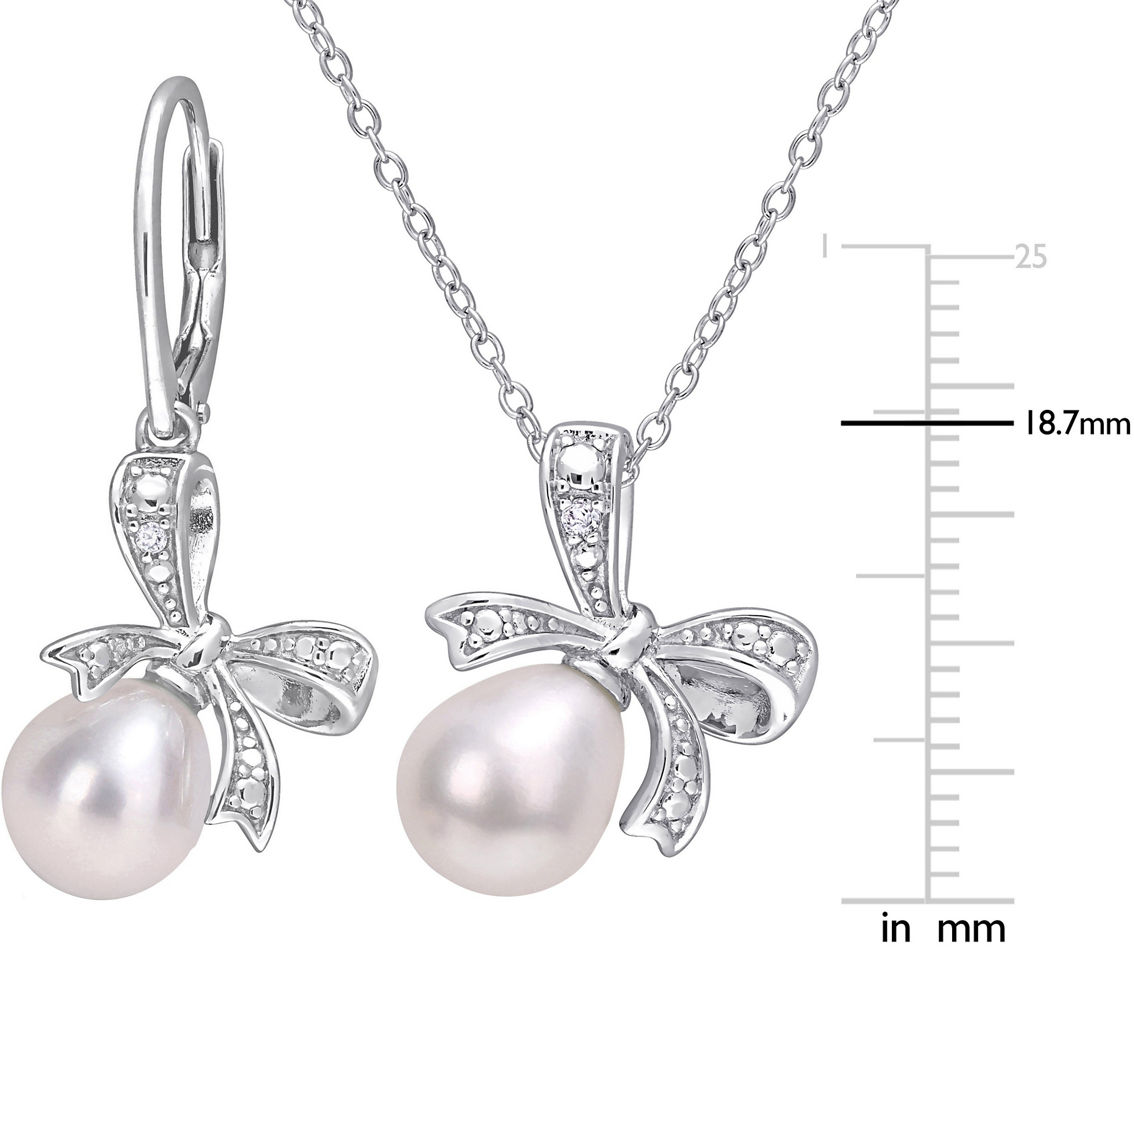 Sofia B. Cultured Freshwater Pearl Diamond Accent Bow Earrings & Necklace 2 pc. Set - Image 3 of 3